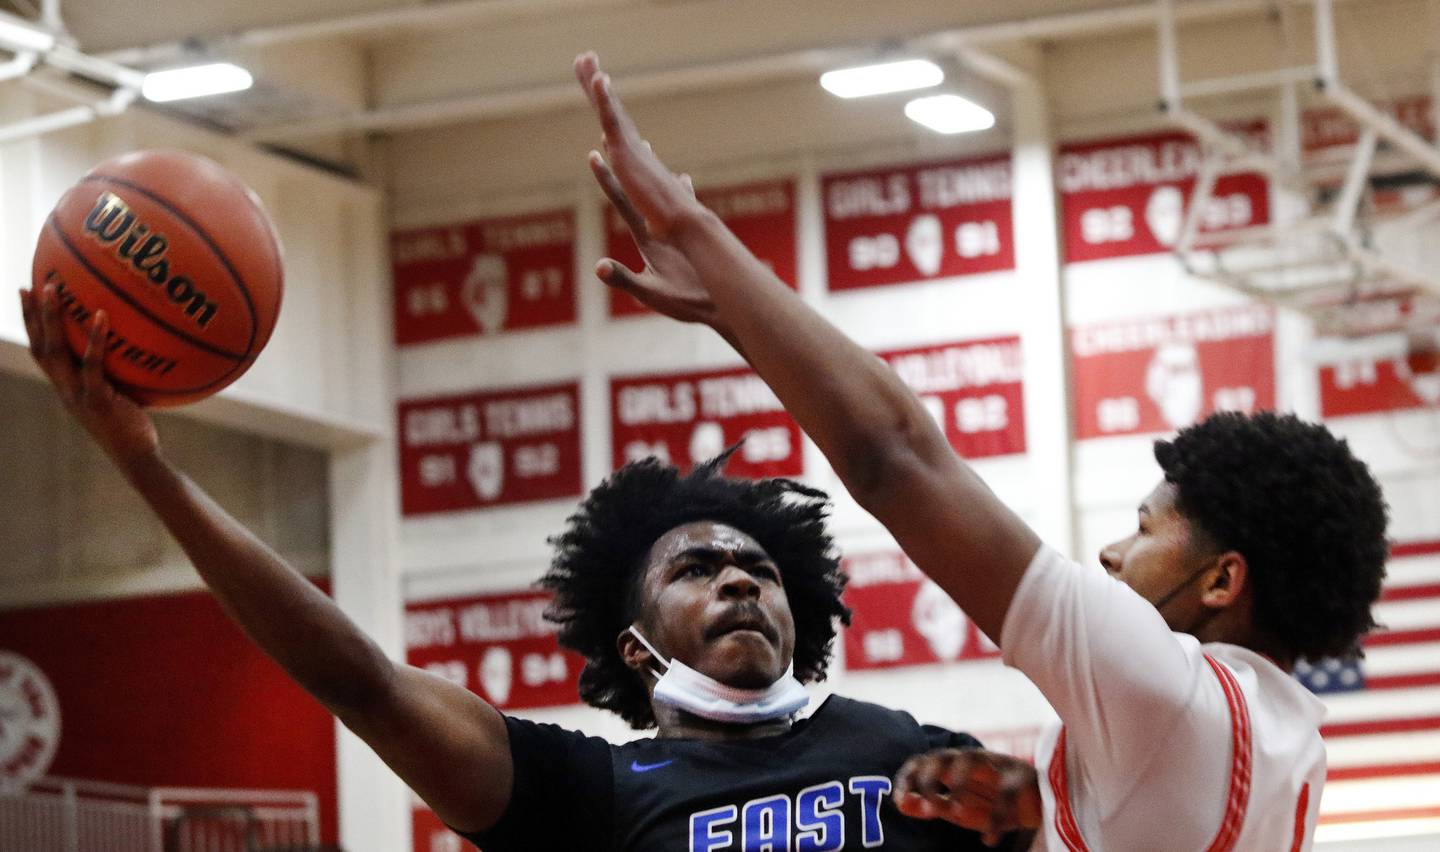 Lincoln-Way East's Tylon Toliver, left, tries to hook a shot over Homewood-Flossmoor's Jurrell Baldwin during a SouthWest Suburban Blue game on Friday, Feb. 11, 2022.